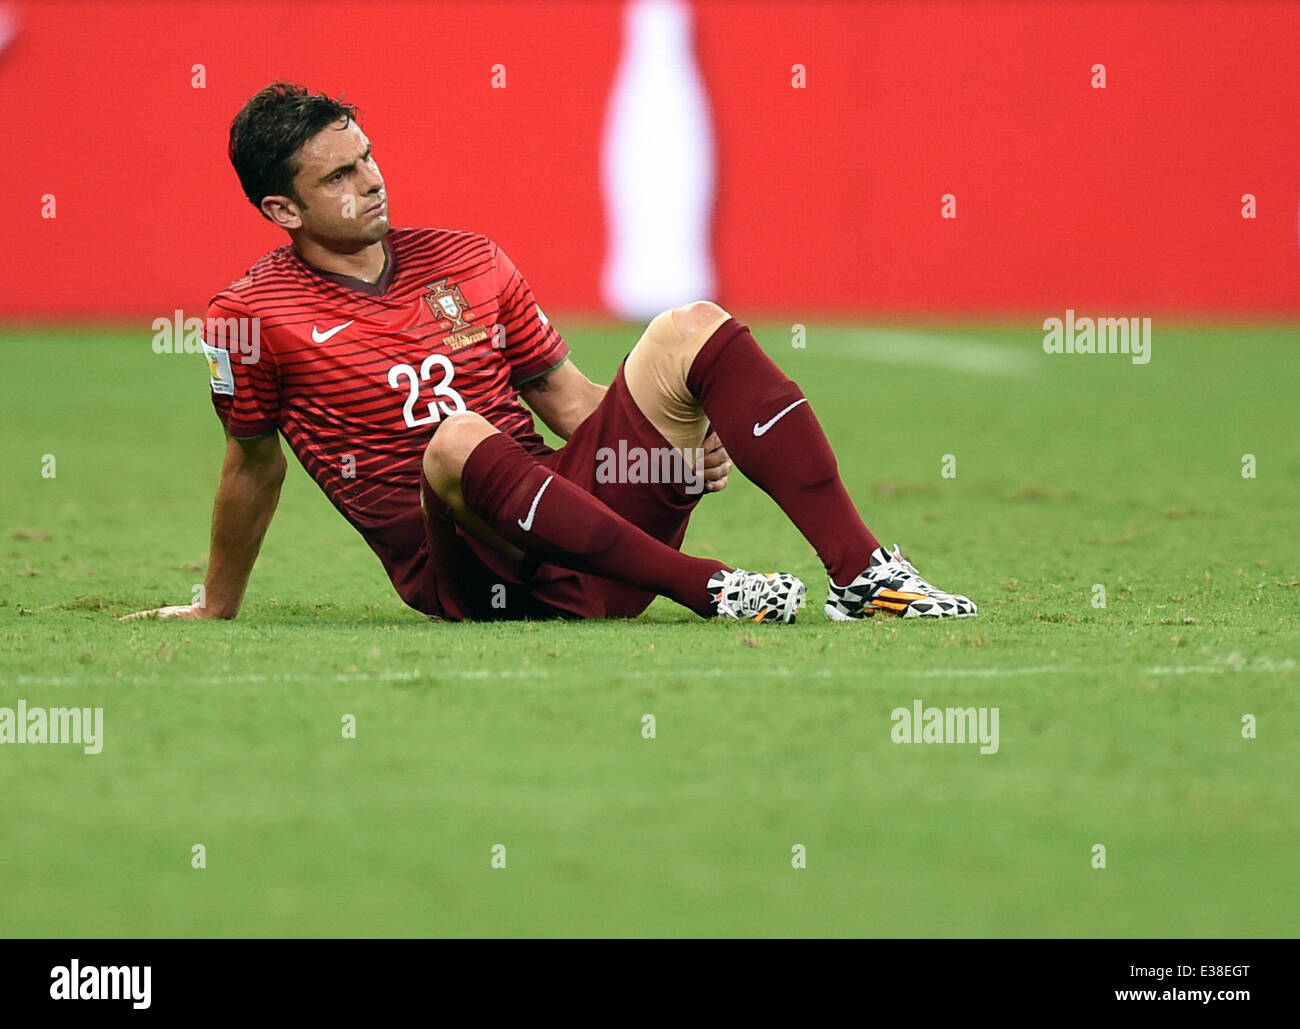 Manaus, Brazil. 22nd June, 2014. Helder Postiga of Portugal sits on the pitch during the FIFA World Cup 2014 group G preliminary round match between the USA and Portugal at the Arena Amazonia Stadium in Manaus, Brazil, 22 June 2014. Photo: Marius Becker/dpa/Alamy Live News Stock Photo